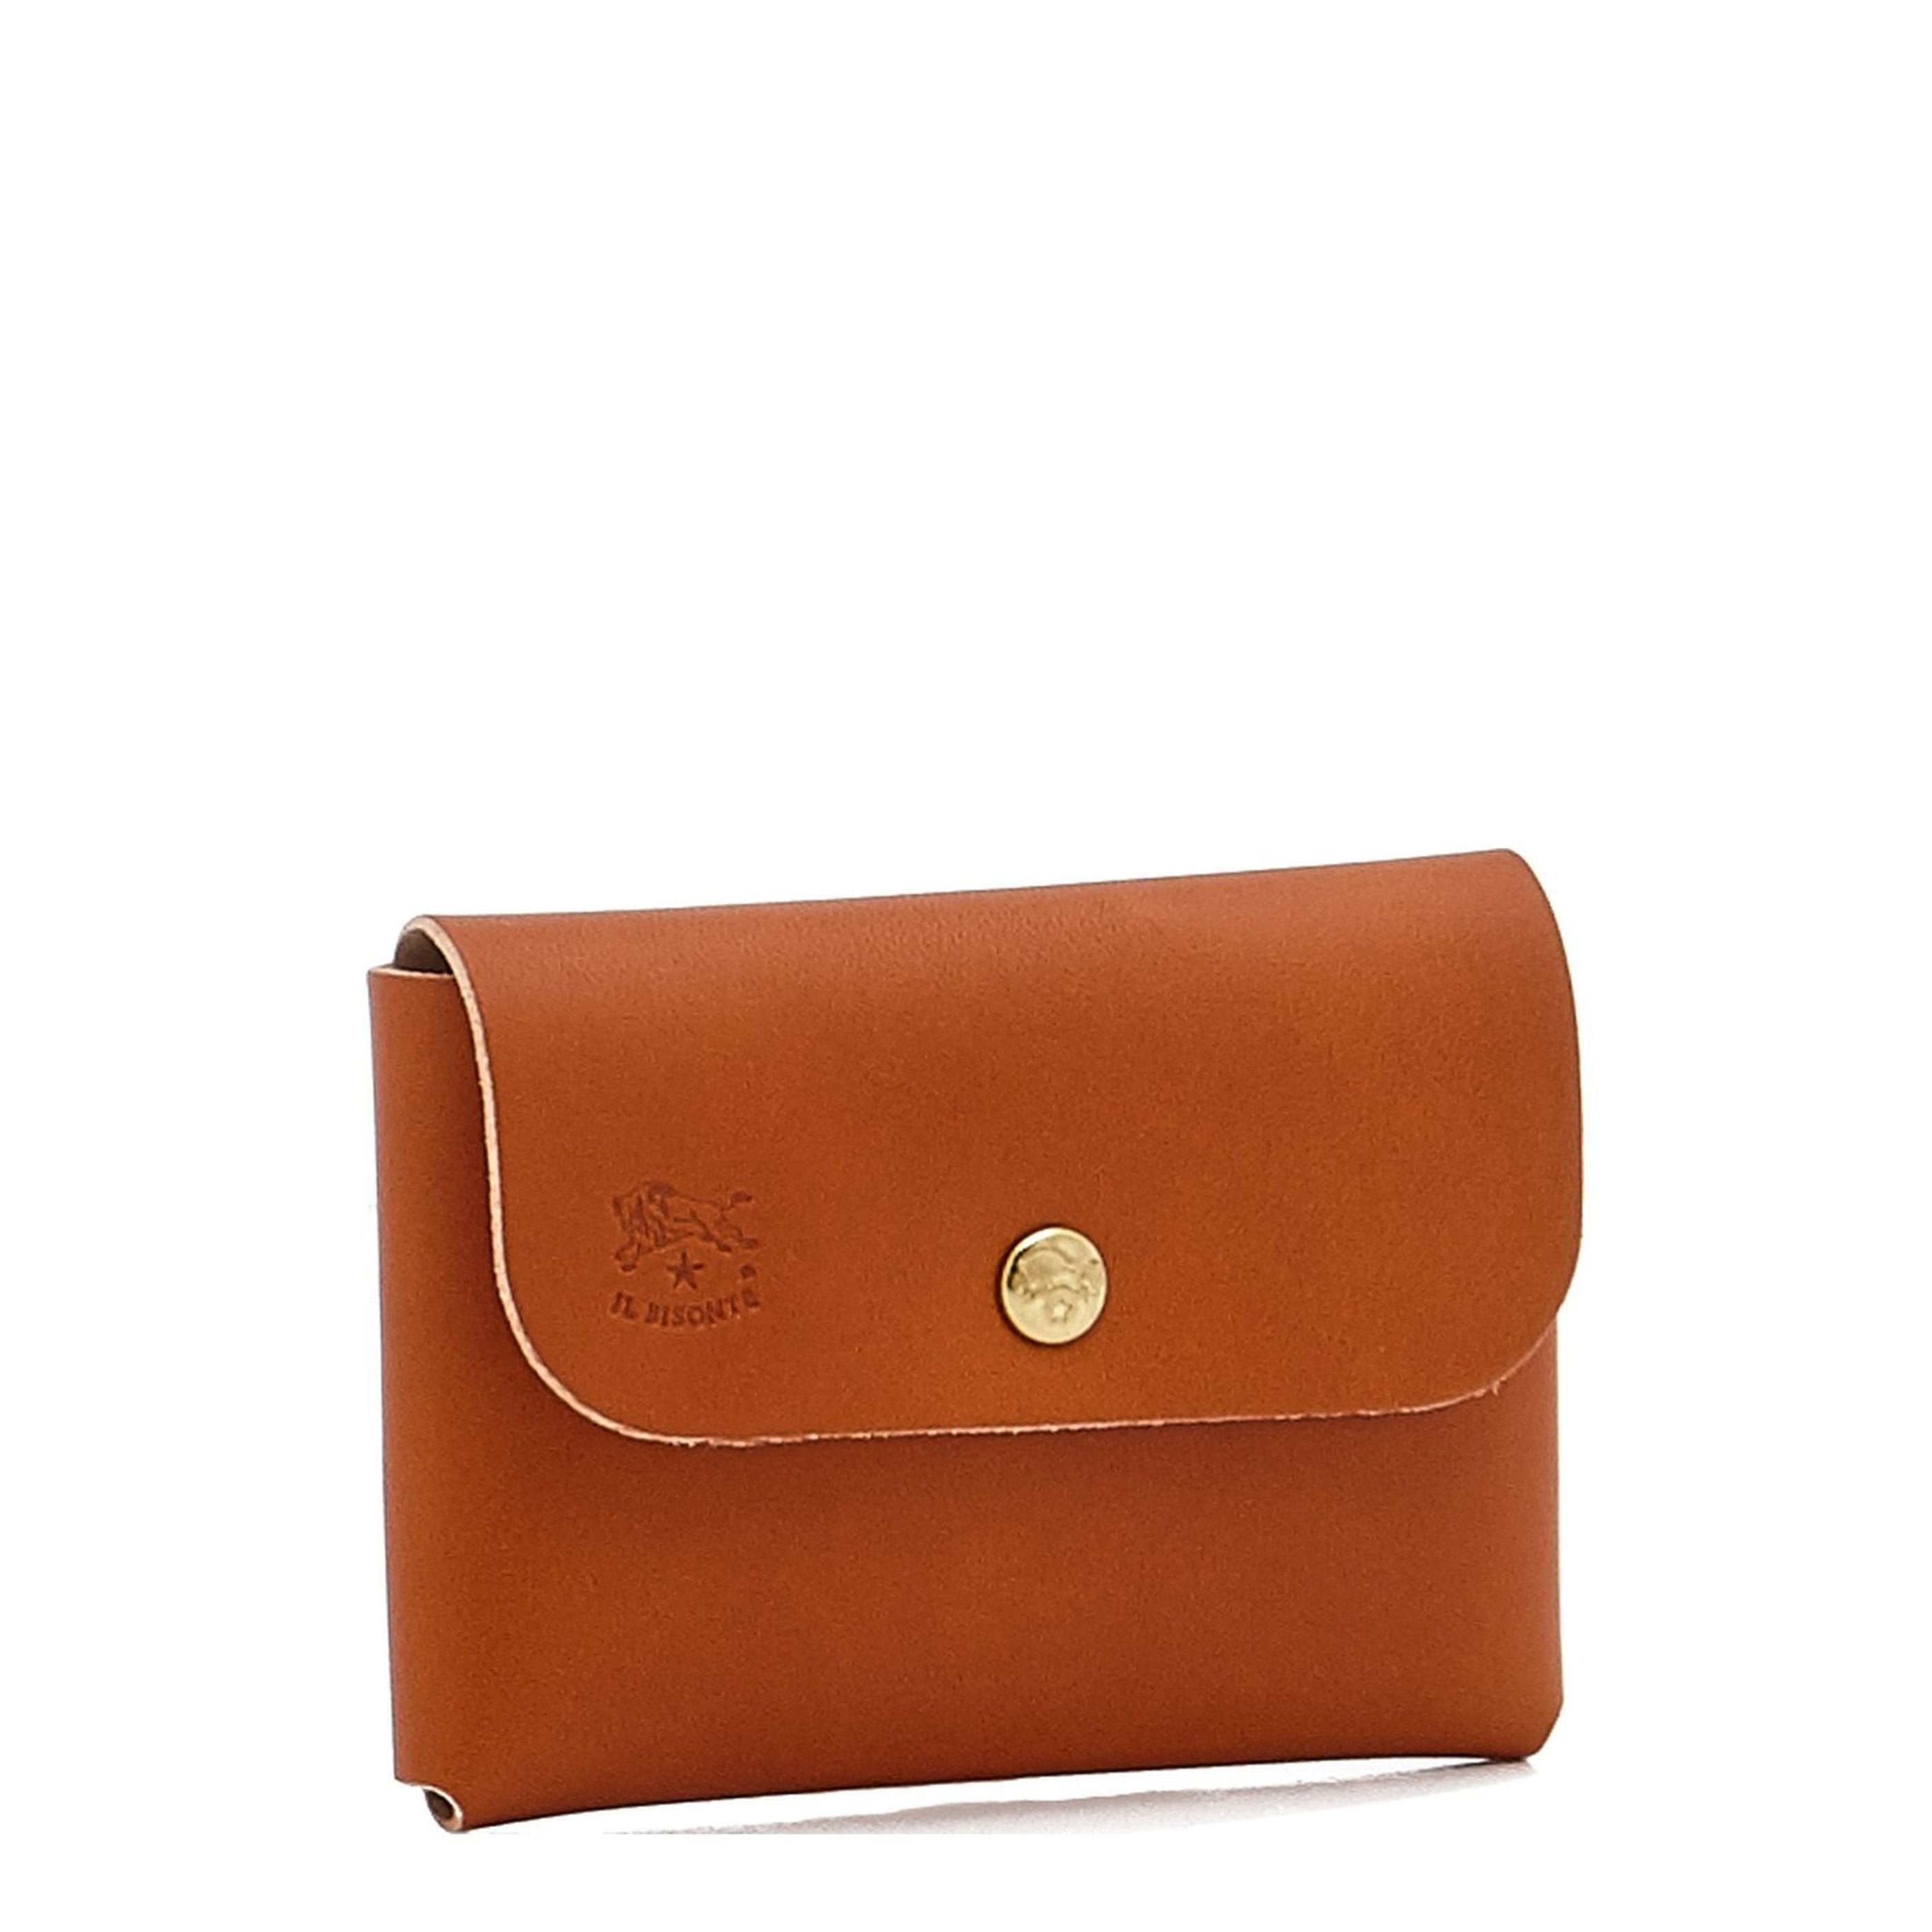 Card case in leather color caramel